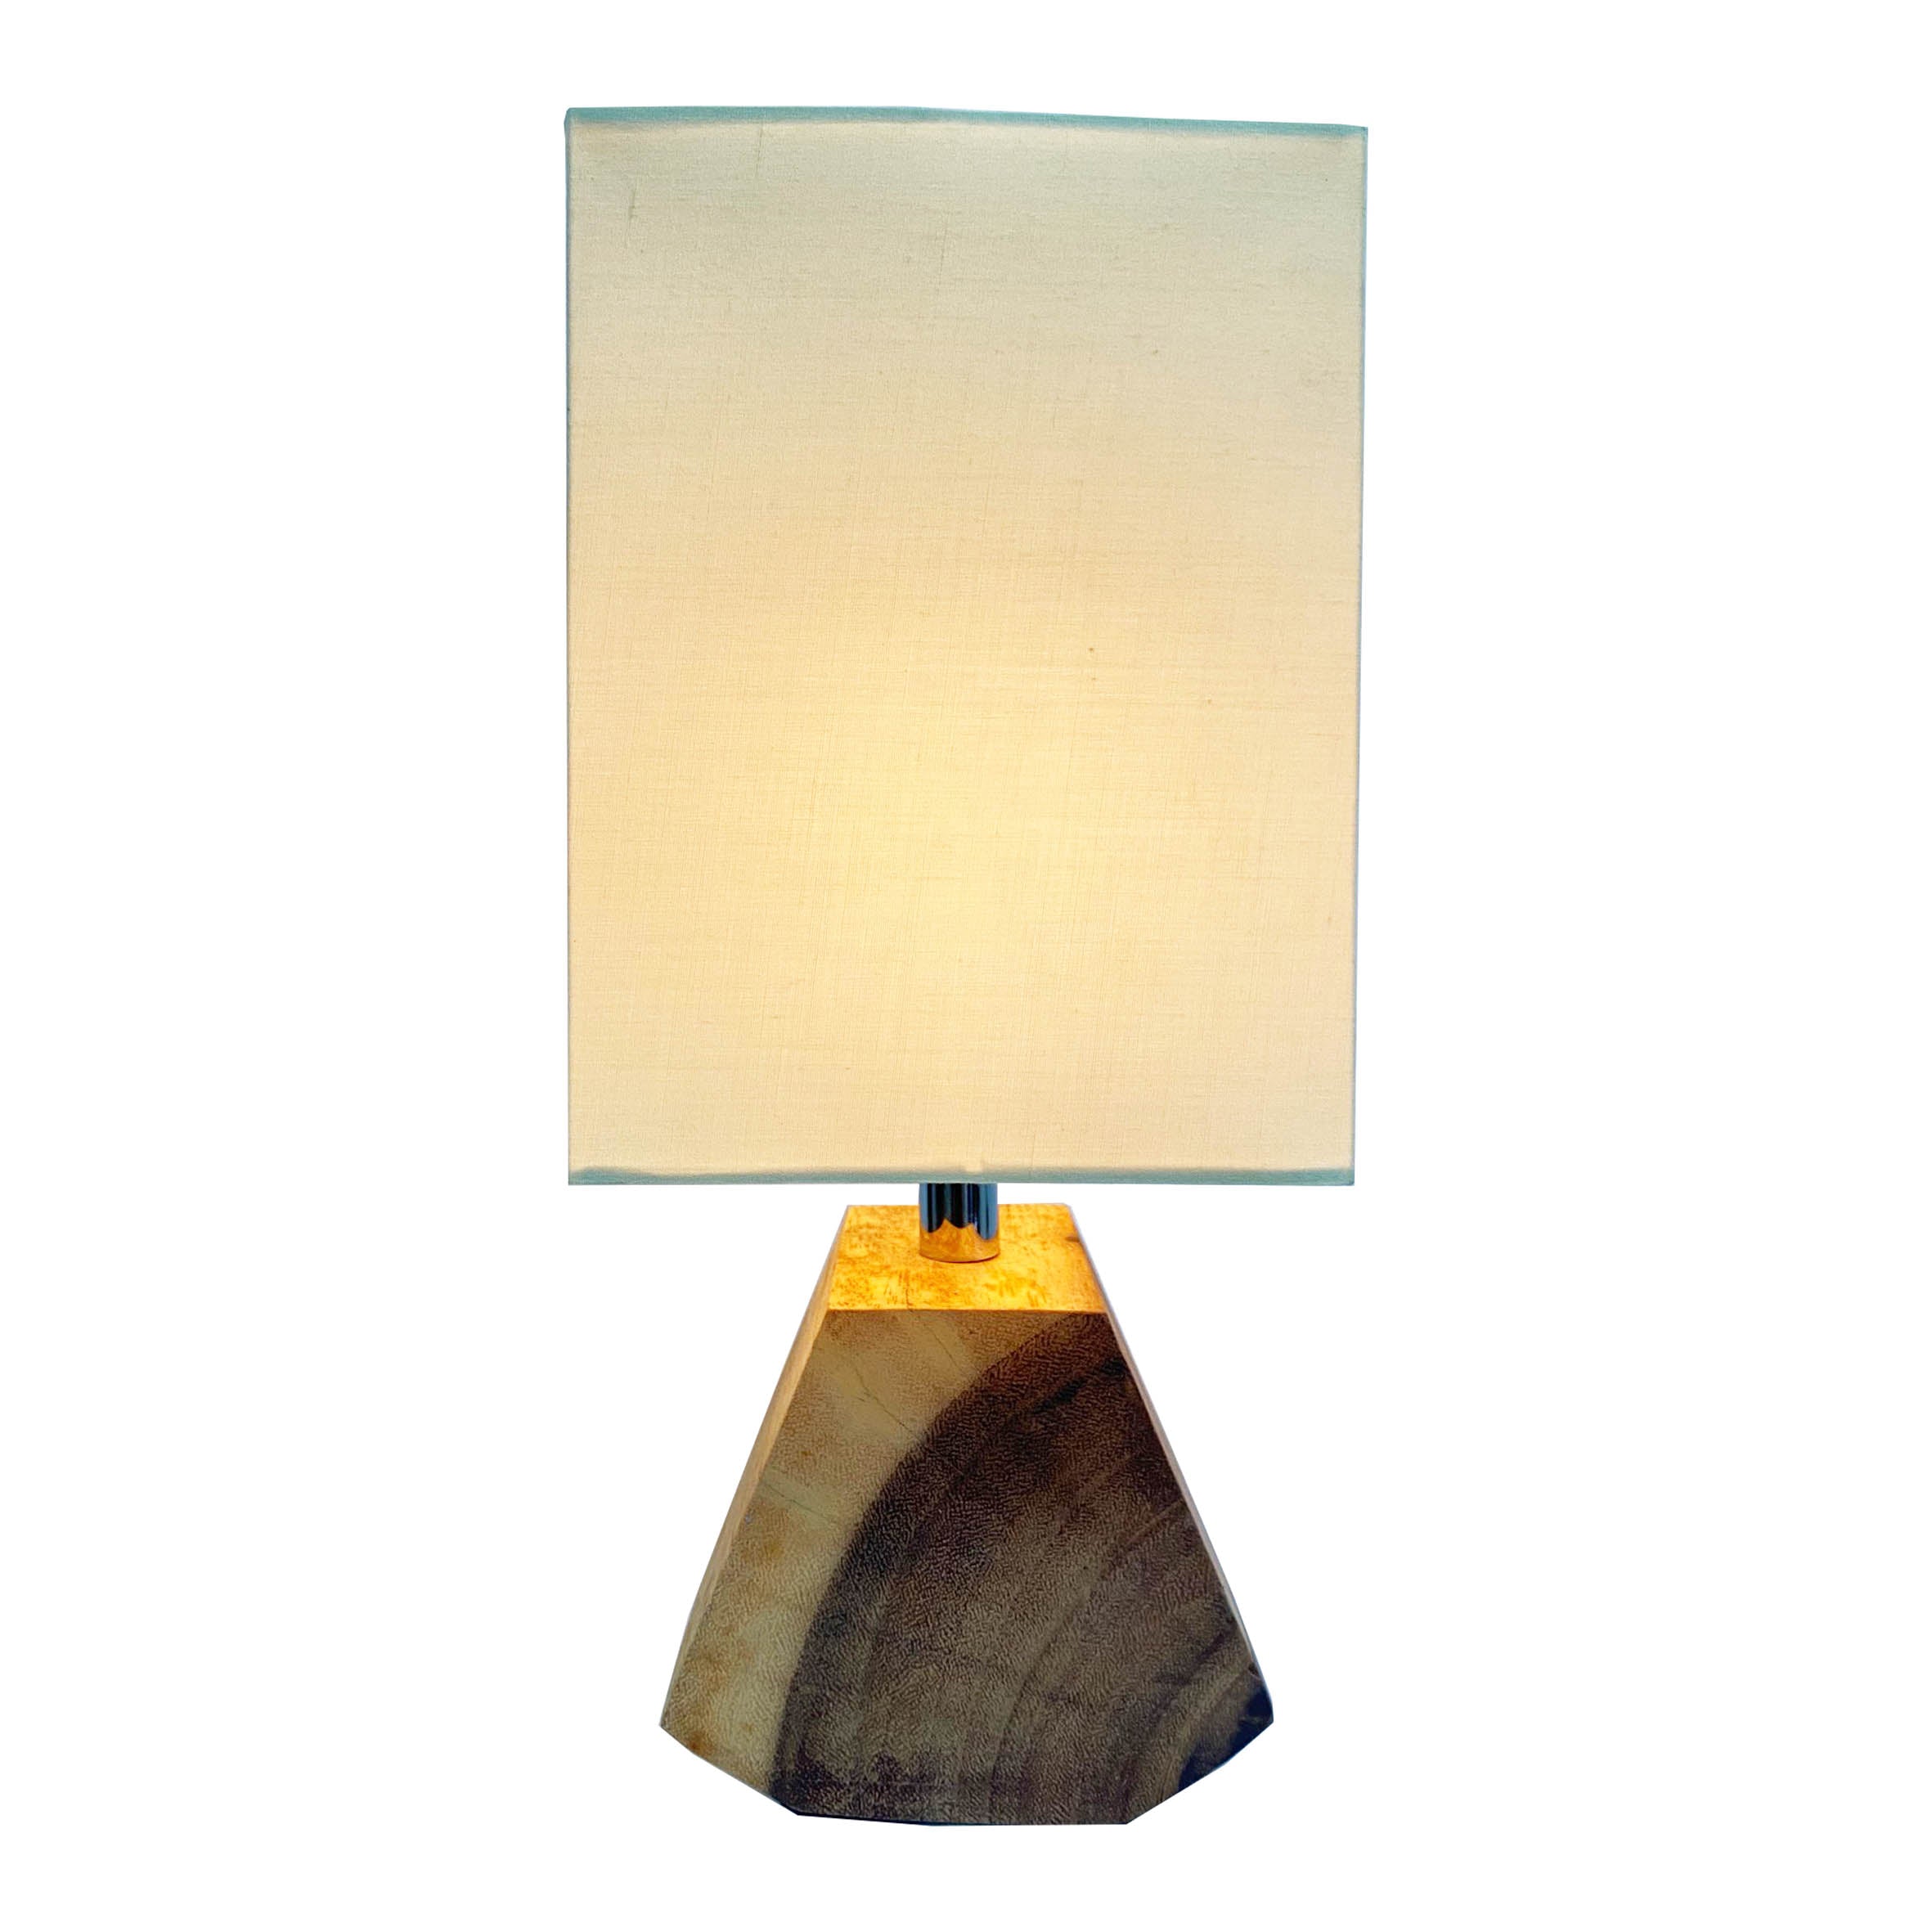 Mini Triangle Table Lamp | 2 Sizes Available